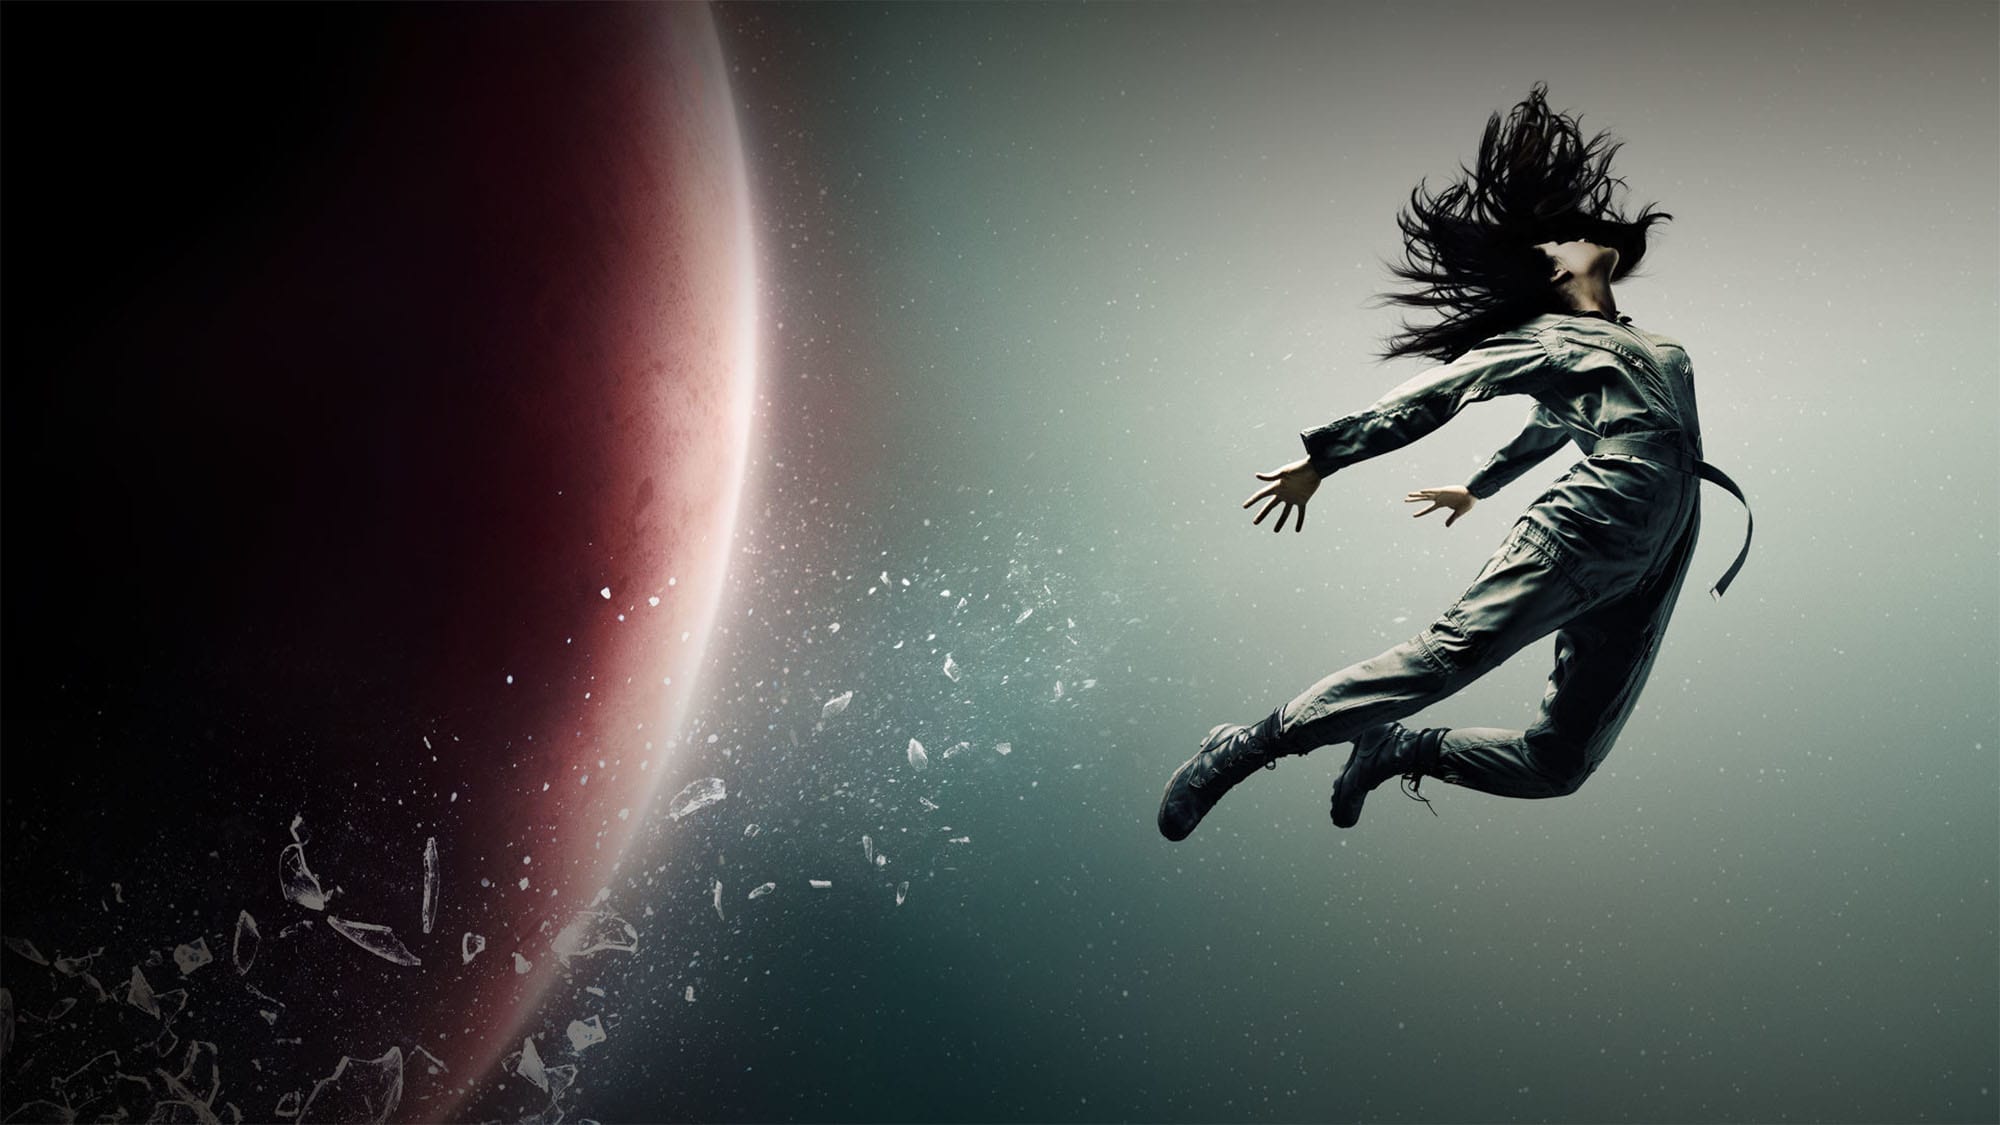 Earlier this month, Syfy announced it had decided not to renew sci-fi series 'The Expanse' for a fourth season. The show – beloved by many for reasons that continue to evade us – is now reportedly in line to possibly be saved by Amazon Studios.